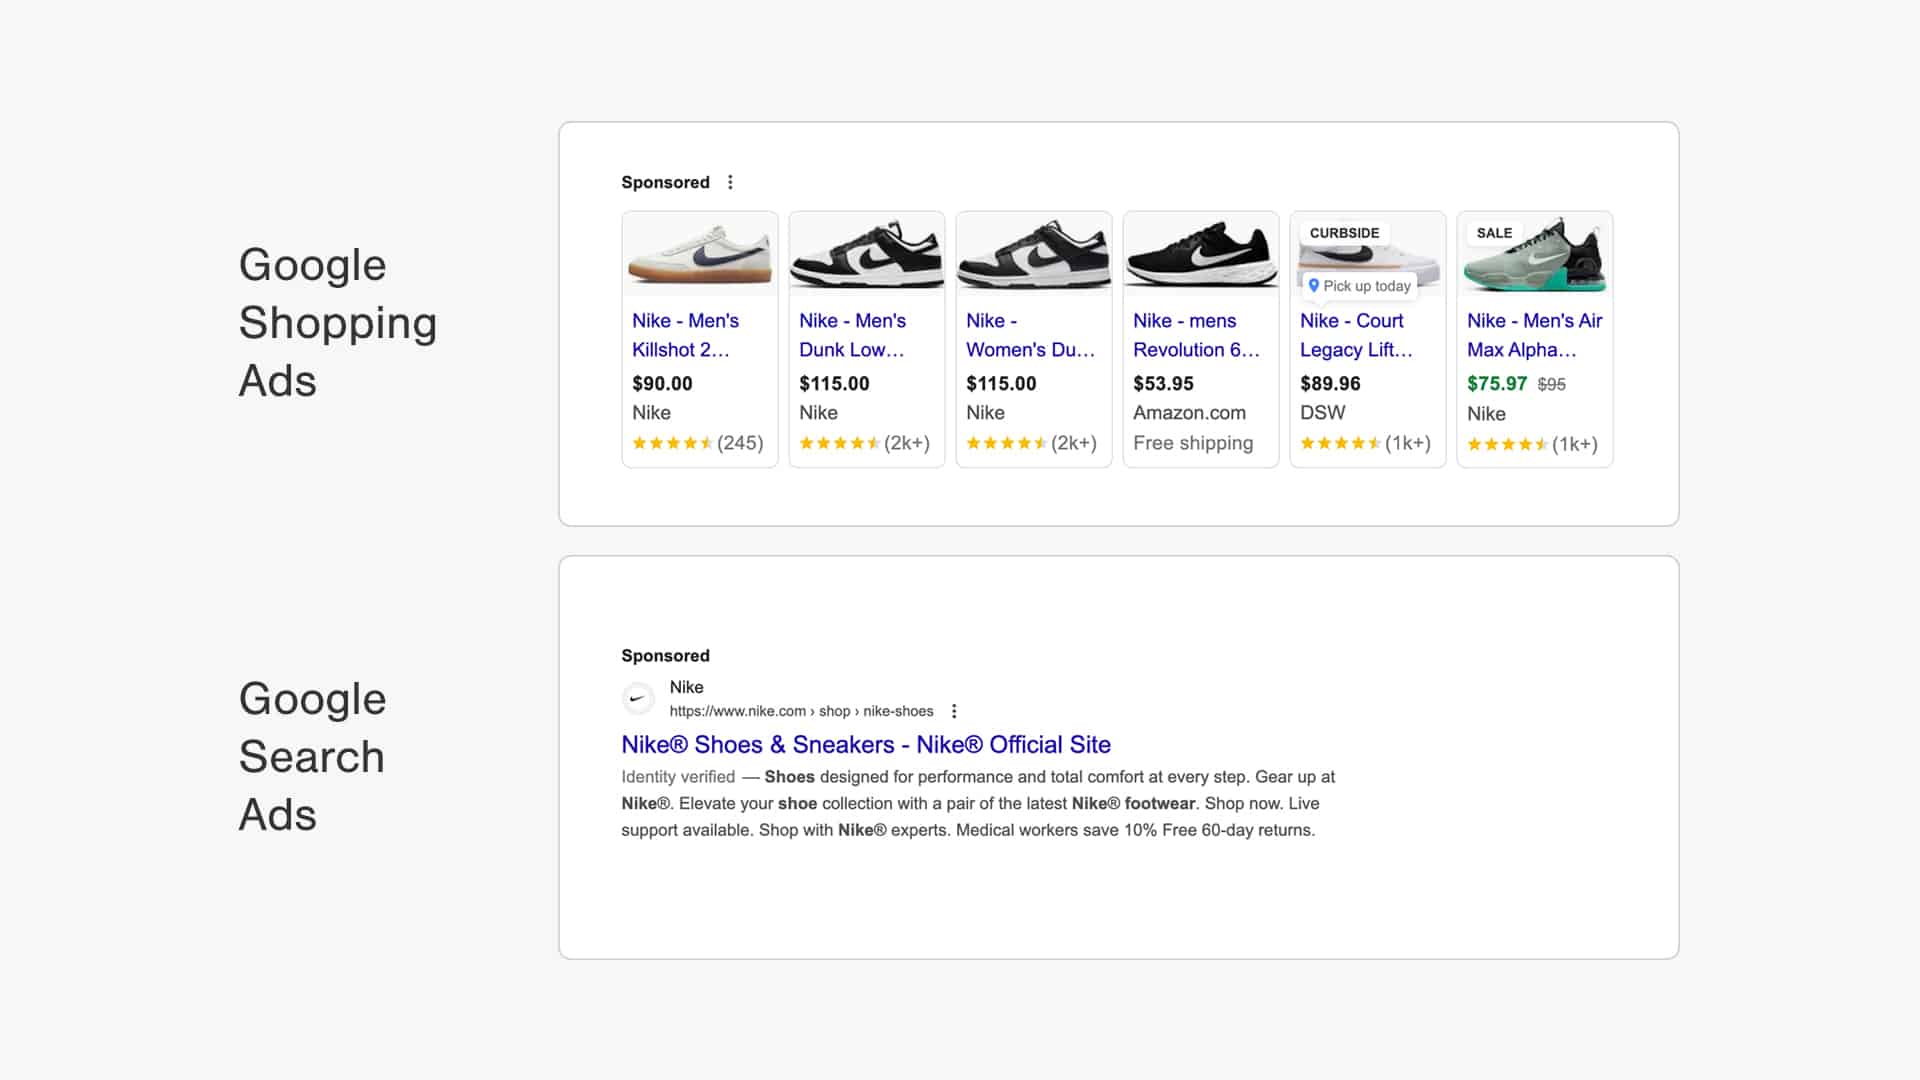 store-growers-2b-shopping-vs-search-ads-example